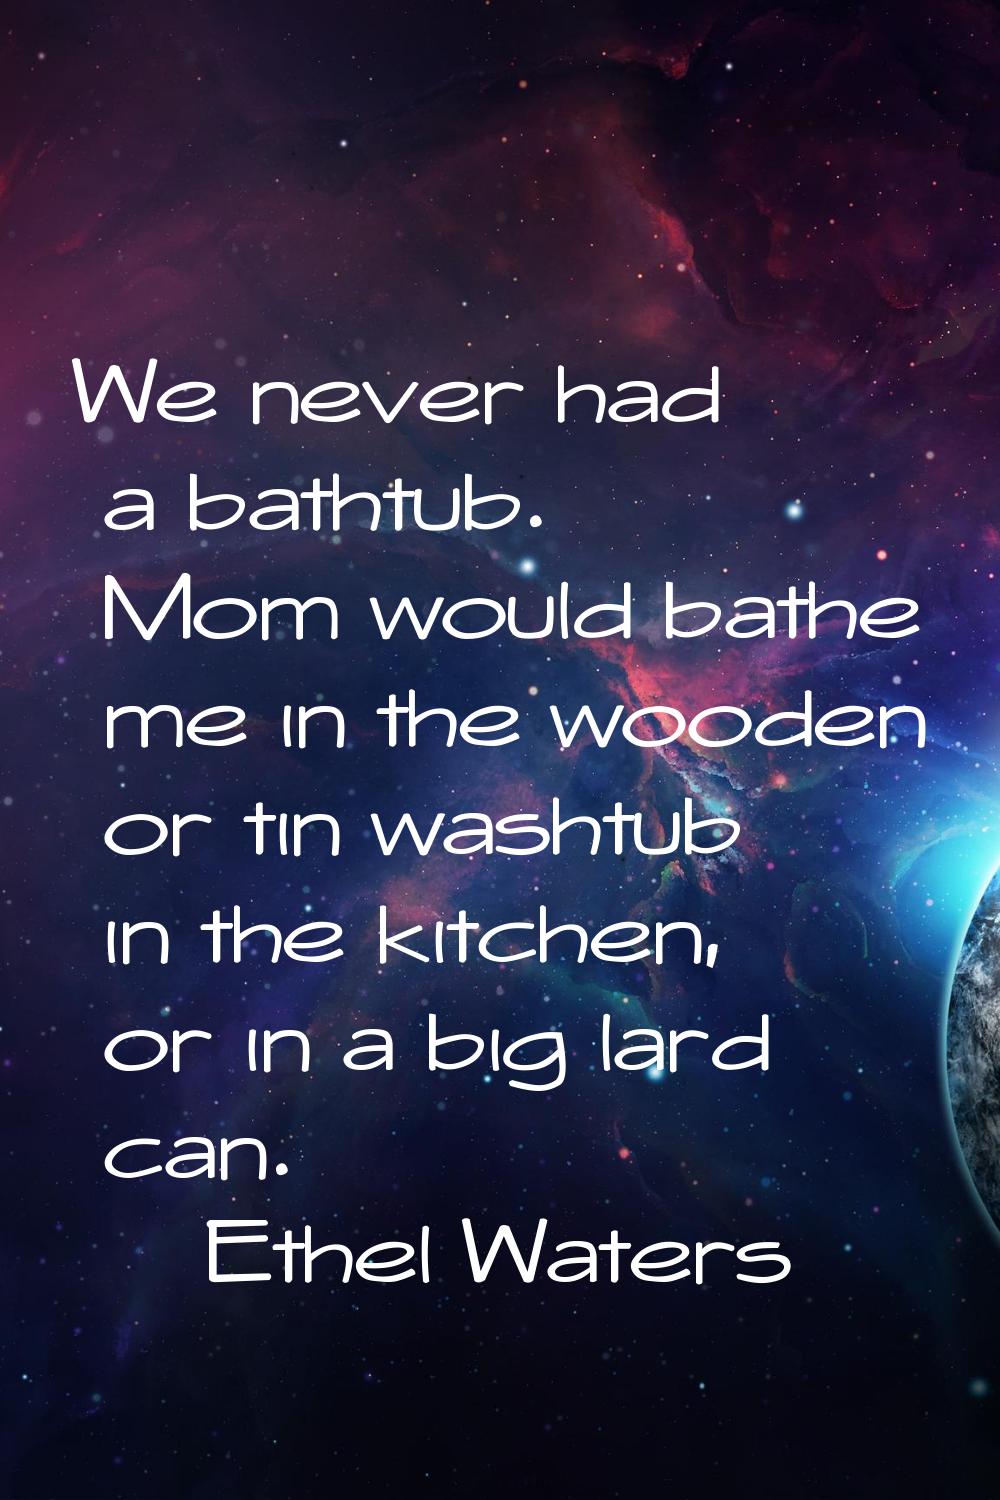 We never had a bathtub. Mom would bathe me in the wooden or tin washtub in the kitchen, or in a big